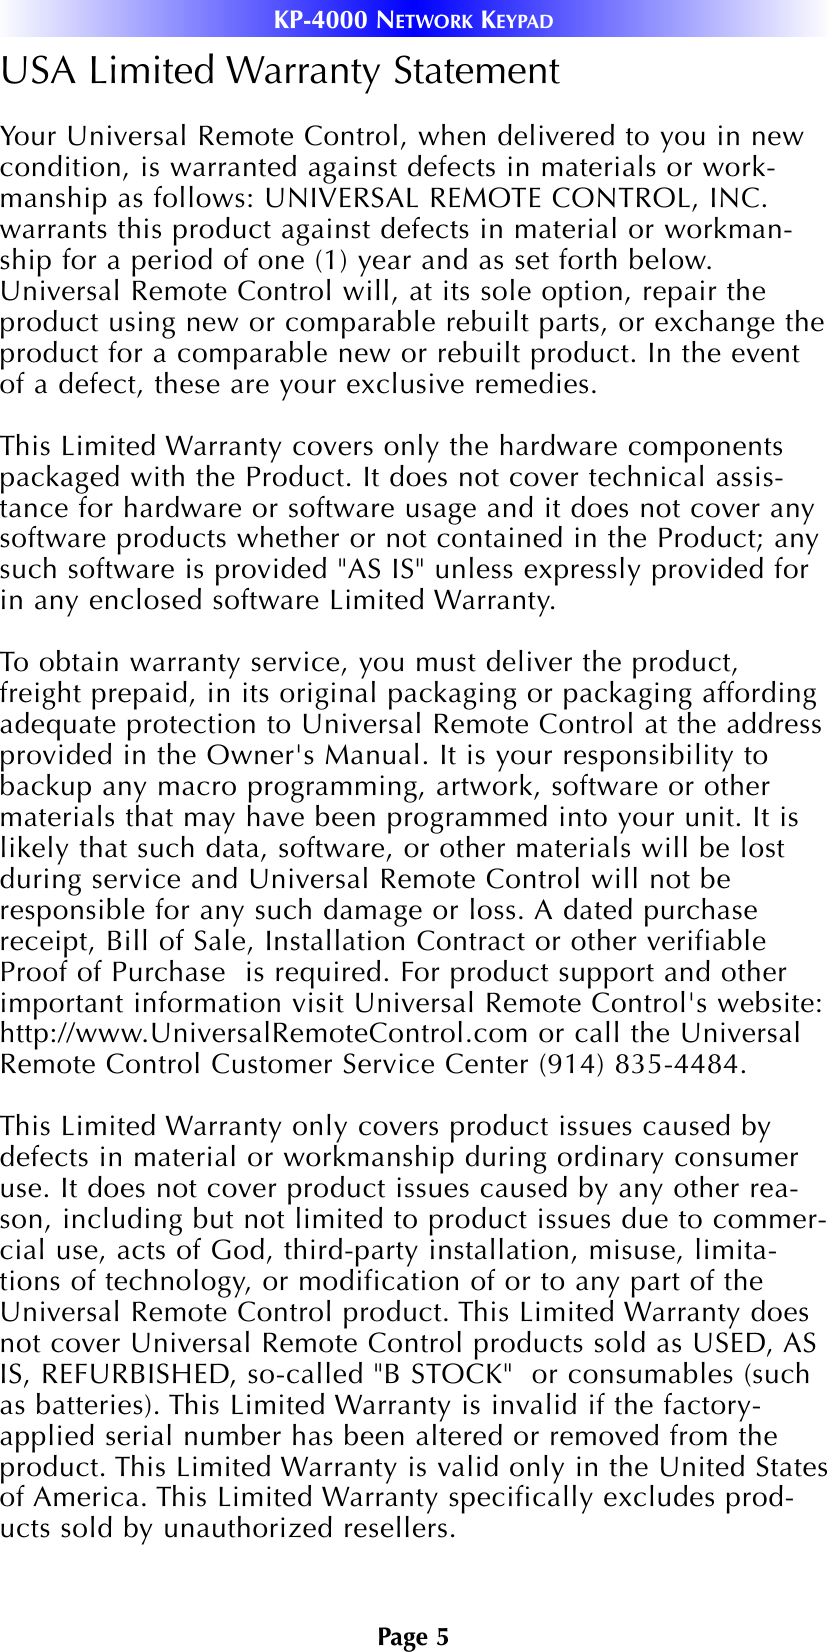 Page 5USA Limited Warranty StatementYour Universal Remote Control, when delivered to you in newcondition, is warranted against defects in materials or work-manship as follows: UNIVERSAL REMOTE CONTROL, INC.warrants this product against defects in material or workman-ship for a period of one (1) year and as set forth below.Universal Remote Control will, at its sole option, repair theproduct using new or comparable rebuilt parts, or exchange theproduct for a comparable new or rebuilt product. In the eventof a defect, these are your exclusive remedies.This Limited Warranty covers only the hardware componentspackaged with the Product. It does not cover technical assis-tance for hardware or software usage and it does not cover anysoftware products whether or not contained in the Product; anysuch software is provided &quot;AS IS&quot; unless expressly provided forin any enclosed software Limited Warranty. To obtain warranty service, you must deliver the product,freight prepaid, in its original packaging or packaging affordingadequate protection to Universal Remote Control at the addressprovided in the Owner&apos;s Manual. It is your responsibility tobackup any macro programming, artwork, software or othermaterials that may have been programmed into your unit. It islikely that such data, software, or other materials will be lostduring service and Universal Remote Control will not beresponsible for any such damage or loss. A dated purchasereceipt, Bill of Sale, Installation Contract or other verifiableProof of Purchase  is required. For product support and otherimportant information visit Universal Remote Control&apos;s website:http://www.UniversalRemoteControl.com or call the UniversalRemote Control Customer Service Center (914) 835-4484. This Limited Warranty only covers product issues caused bydefects in material or workmanship during ordinary consumeruse. It does not cover product issues caused by any other rea-son, including but not limited to product issues due to commer-cial use, acts of God, third-party installation, misuse, limita-tions of technology, or modification of or to any part of theUniversal Remote Control product. This Limited Warranty doesnot cover Universal Remote Control products sold as USED, ASIS, REFURBISHED, so-called &quot;B STOCK&quot;  or consumables (suchas batteries). This Limited Warranty is invalid if the factory-applied serial number has been altered or removed from theproduct. This Limited Warranty is valid only in the United Statesof America. This Limited Warranty specifically excludes prod-ucts sold by unauthorized resellers.KP-4000 NETWORK KEYPAD